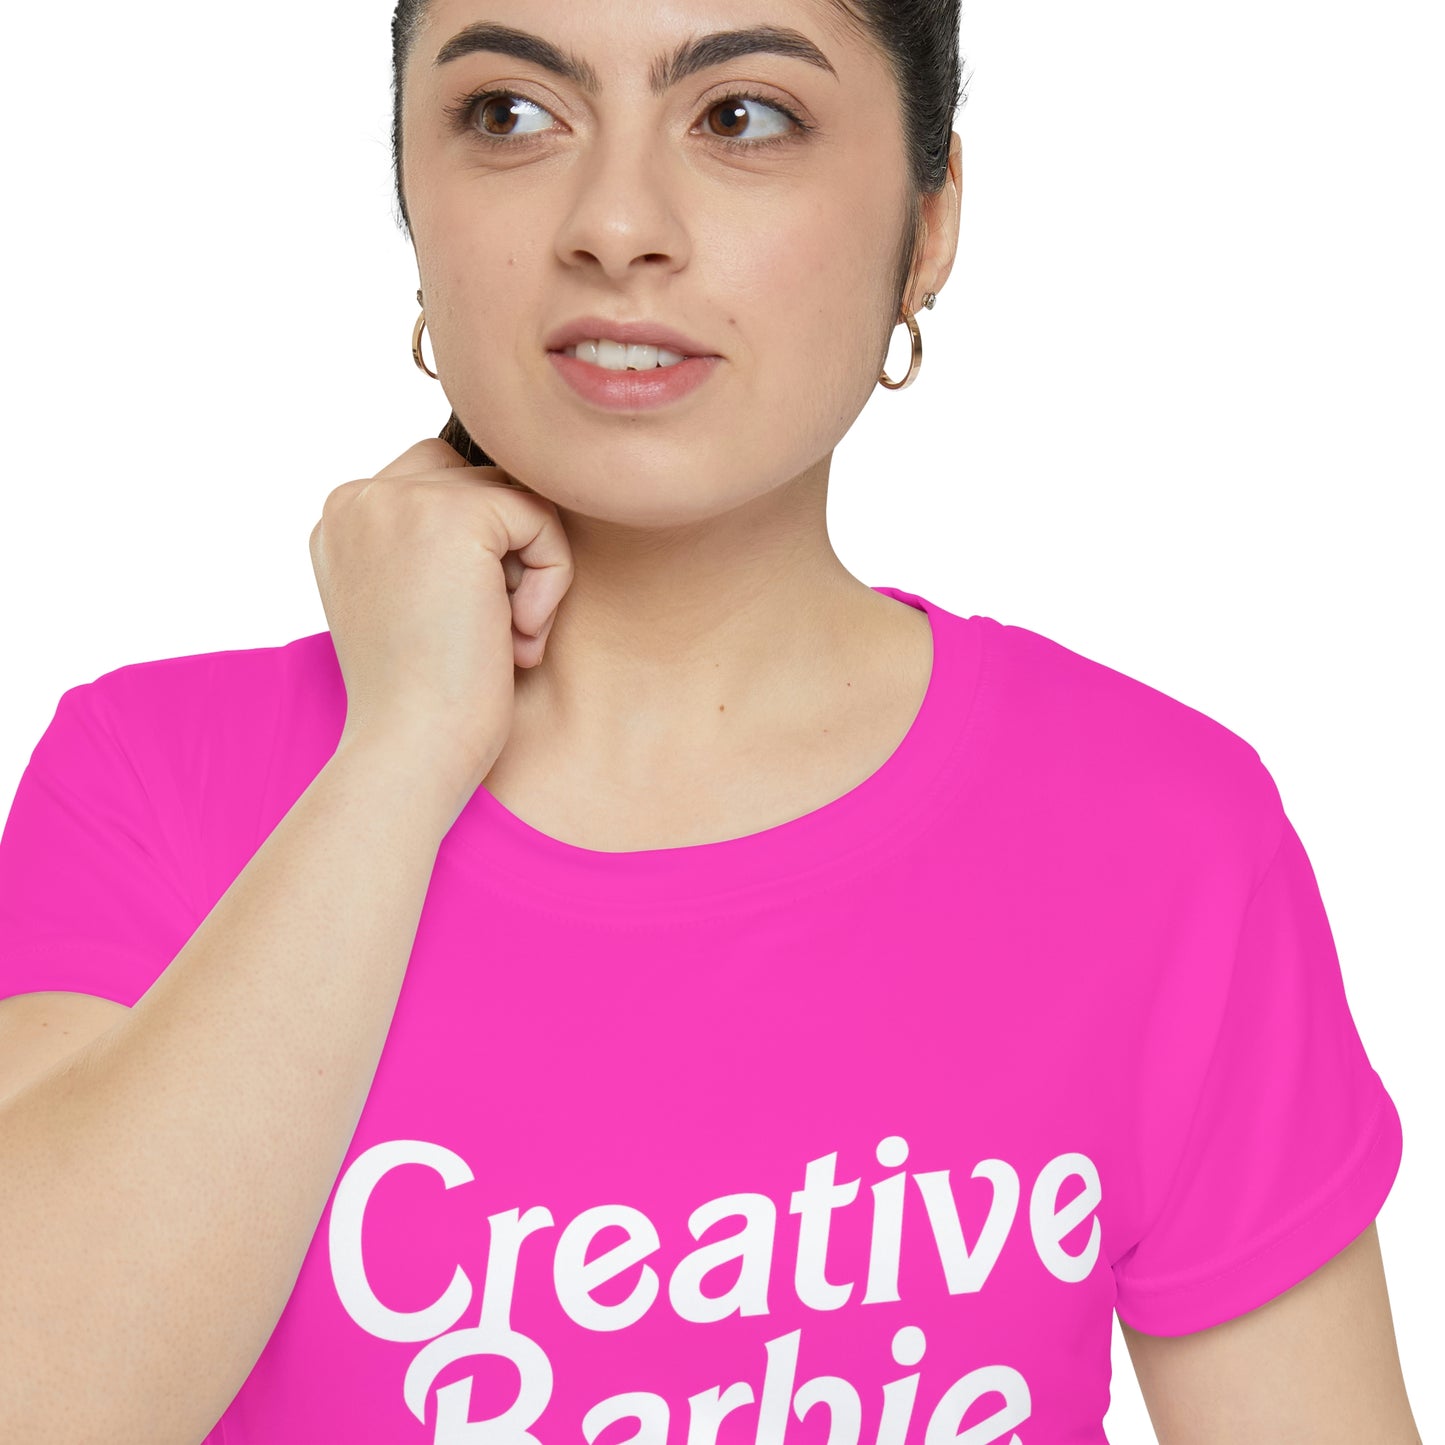 Creative Barbie, Bachelorette Party Shirts, Bridesmaid Gifts, Here comes the Party Tees, Group Party Favor Shirts, Bridal Party Shirt for women